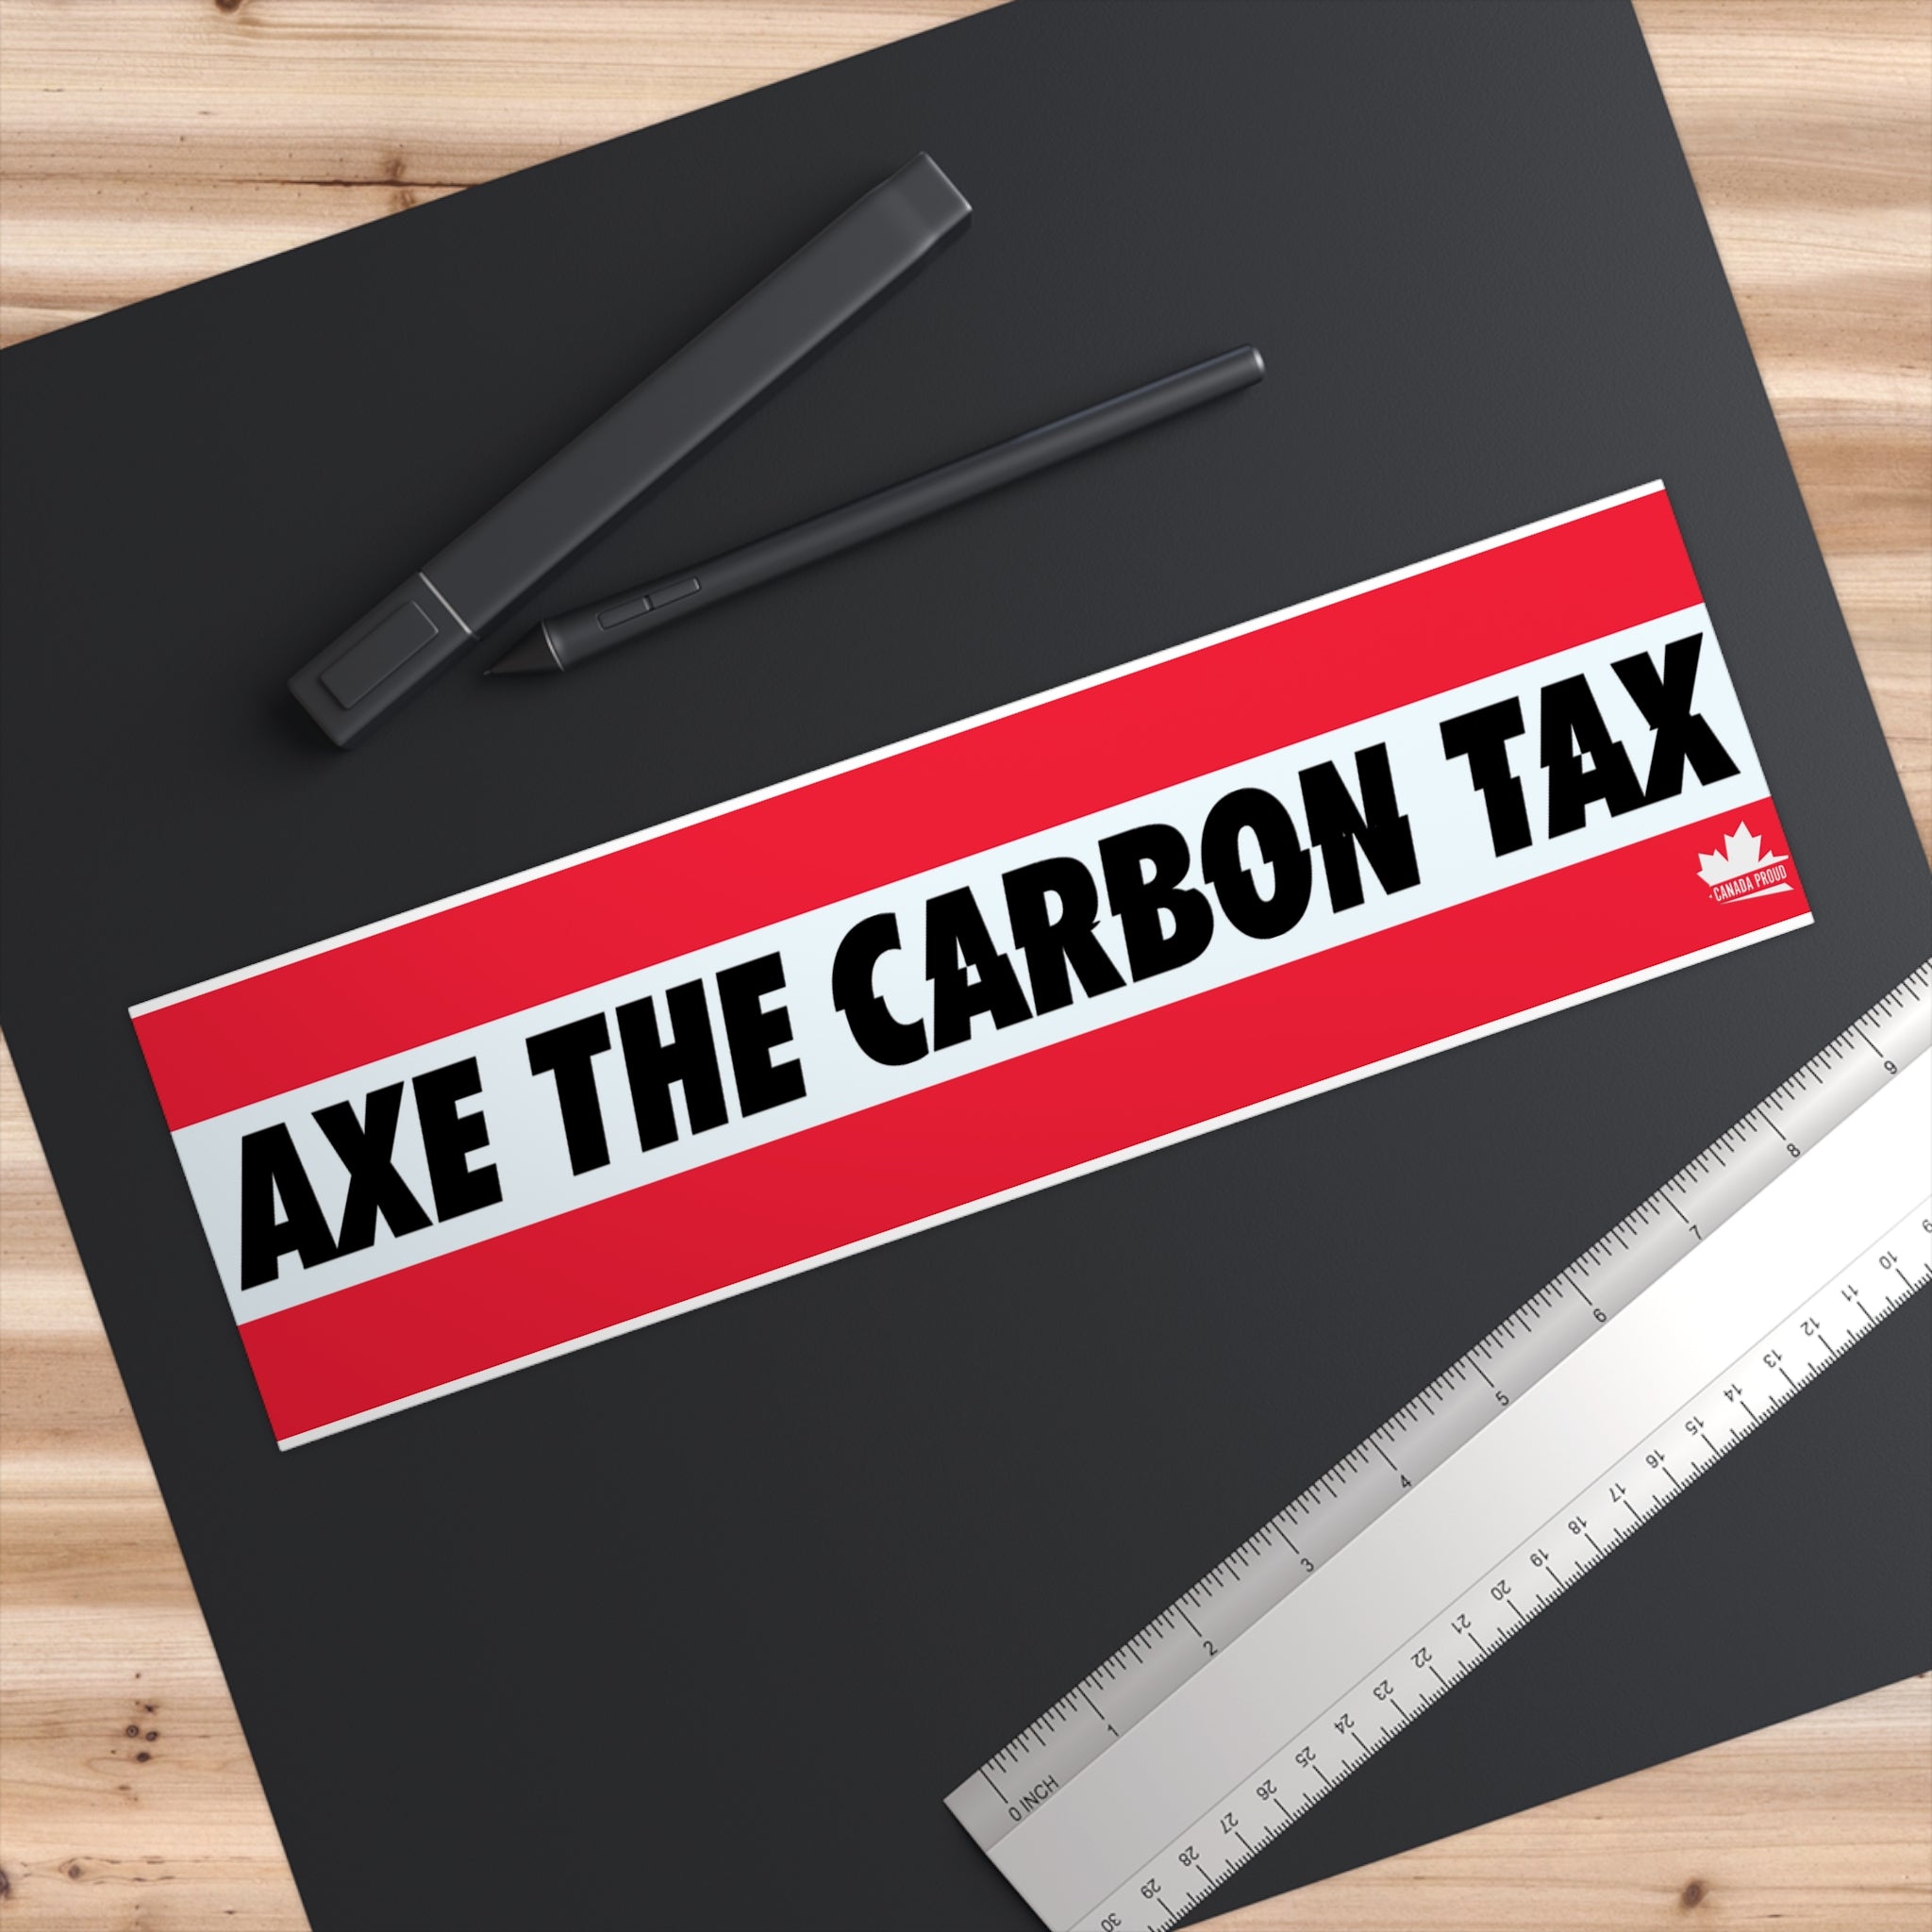 Axe the Carbon Tax Bumper Stickers